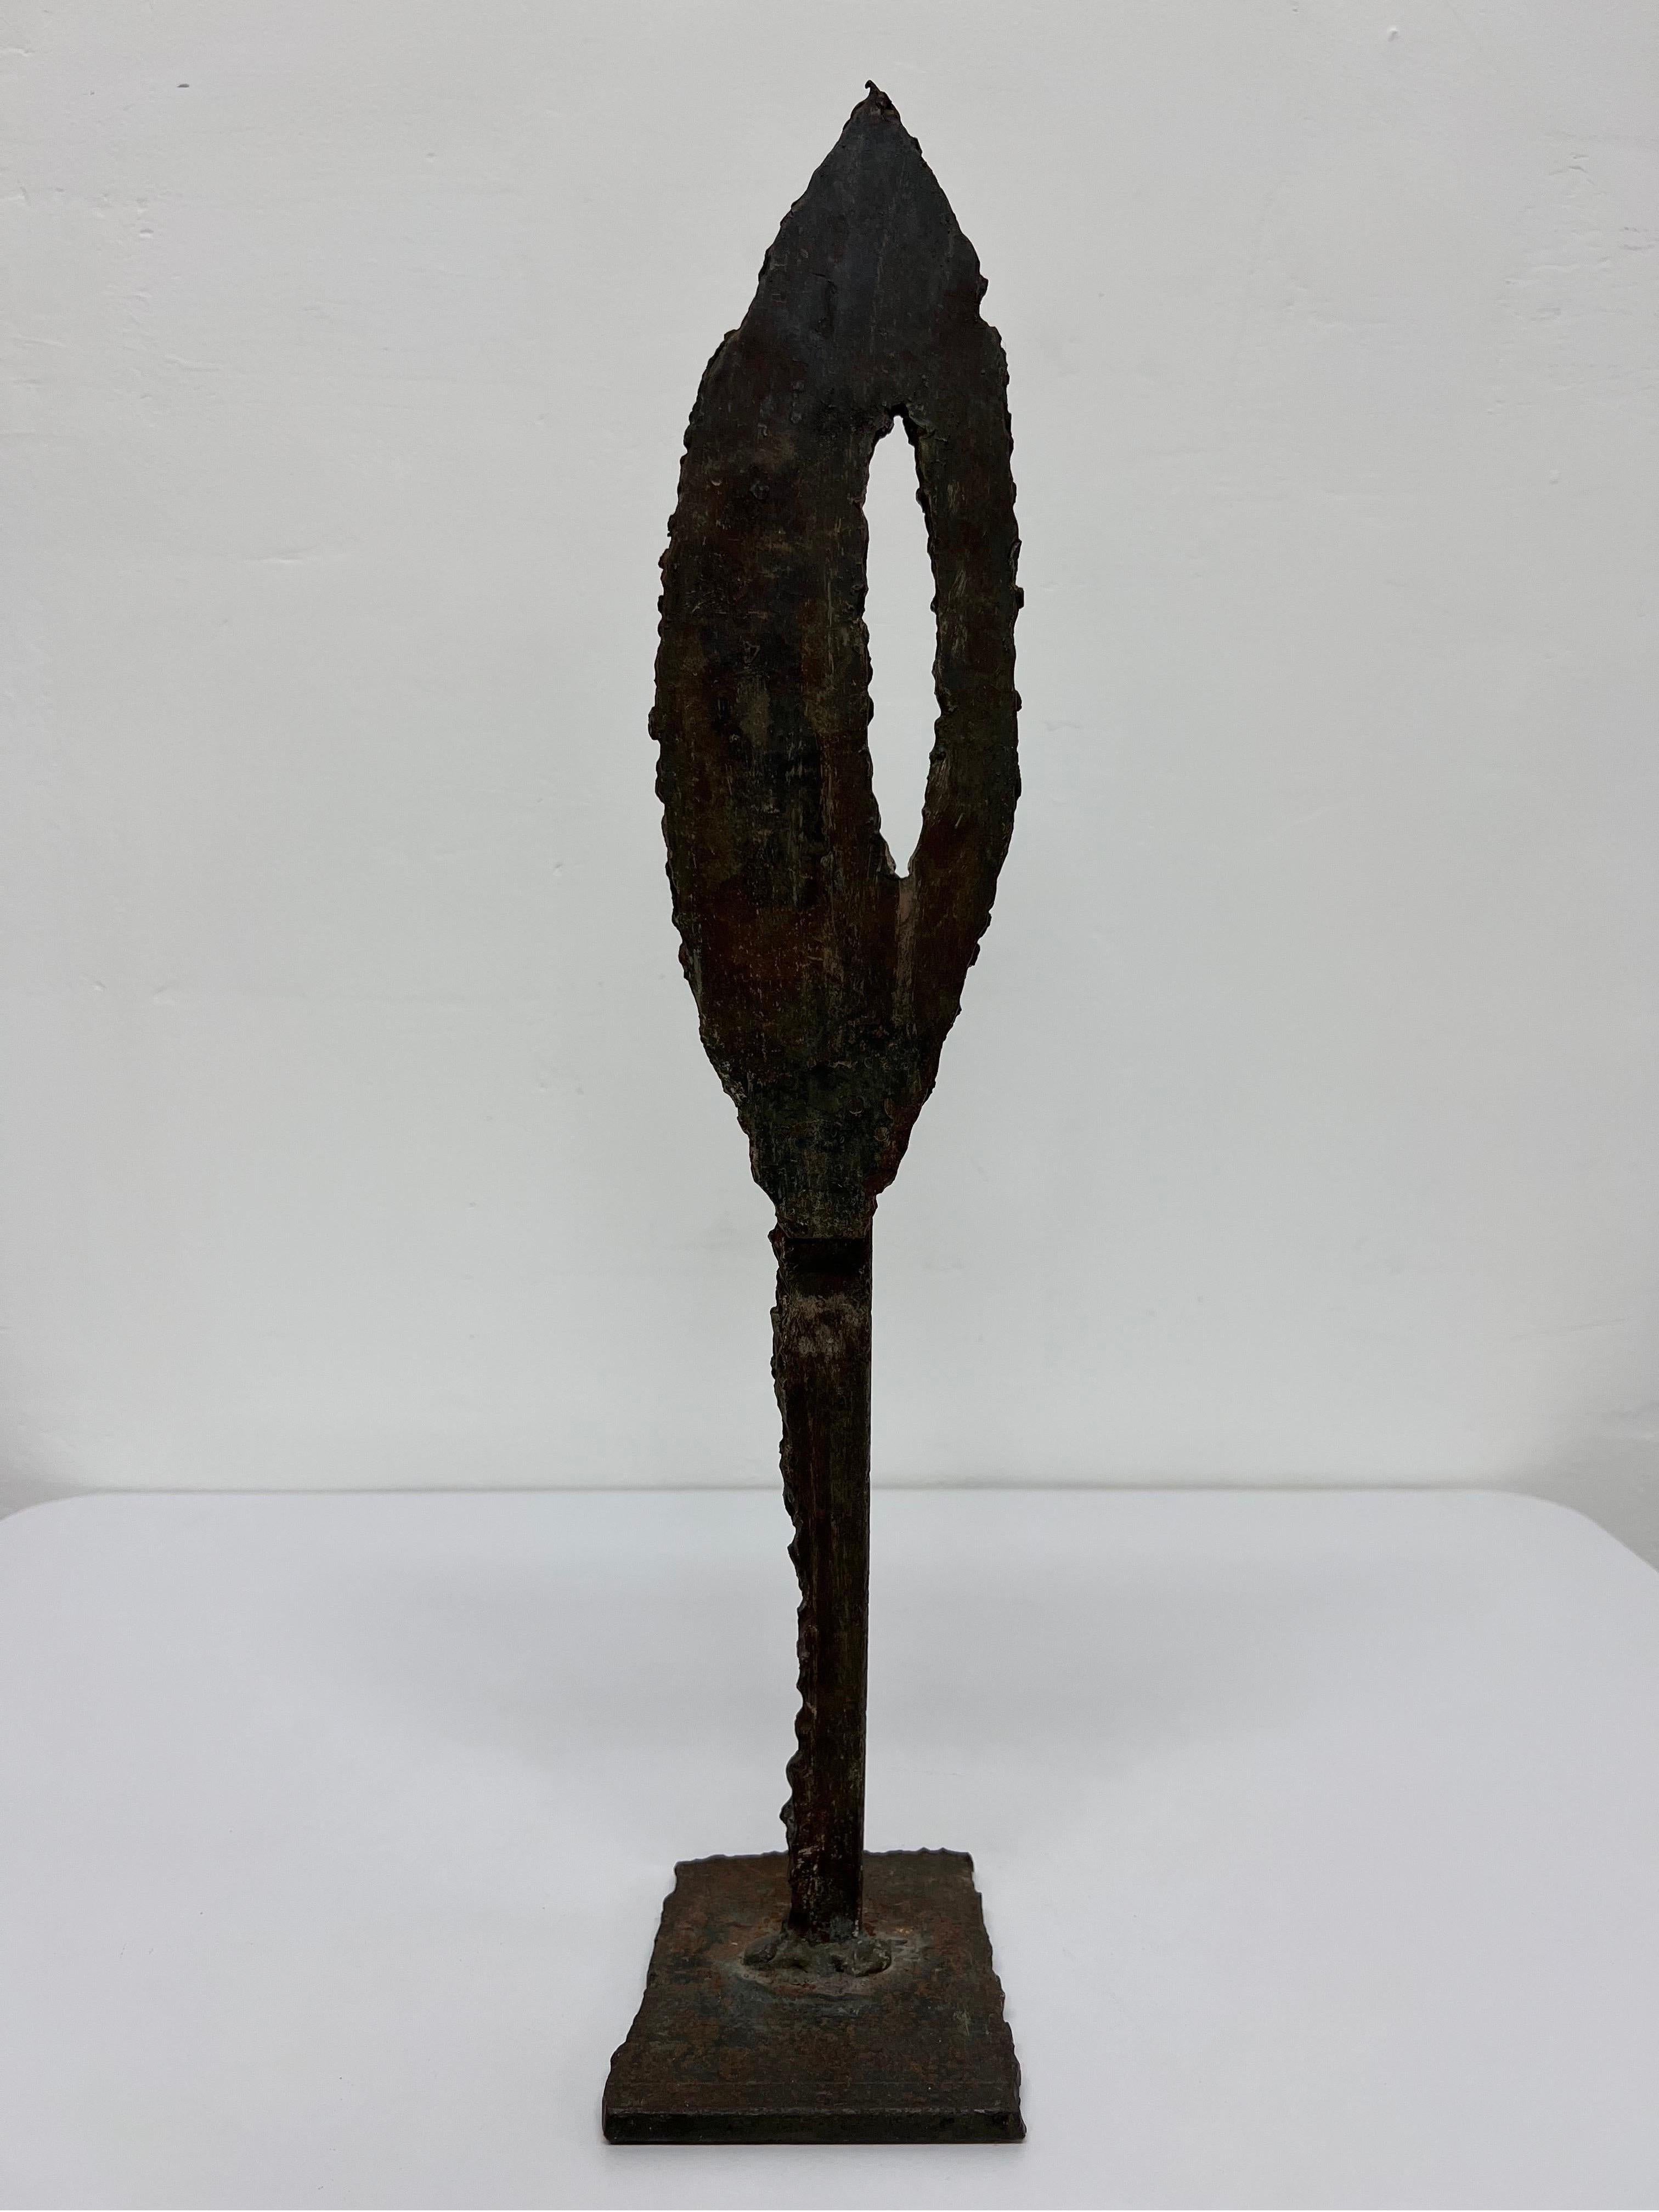 Torch cut and welded spear sculpture with dark bronze patina.